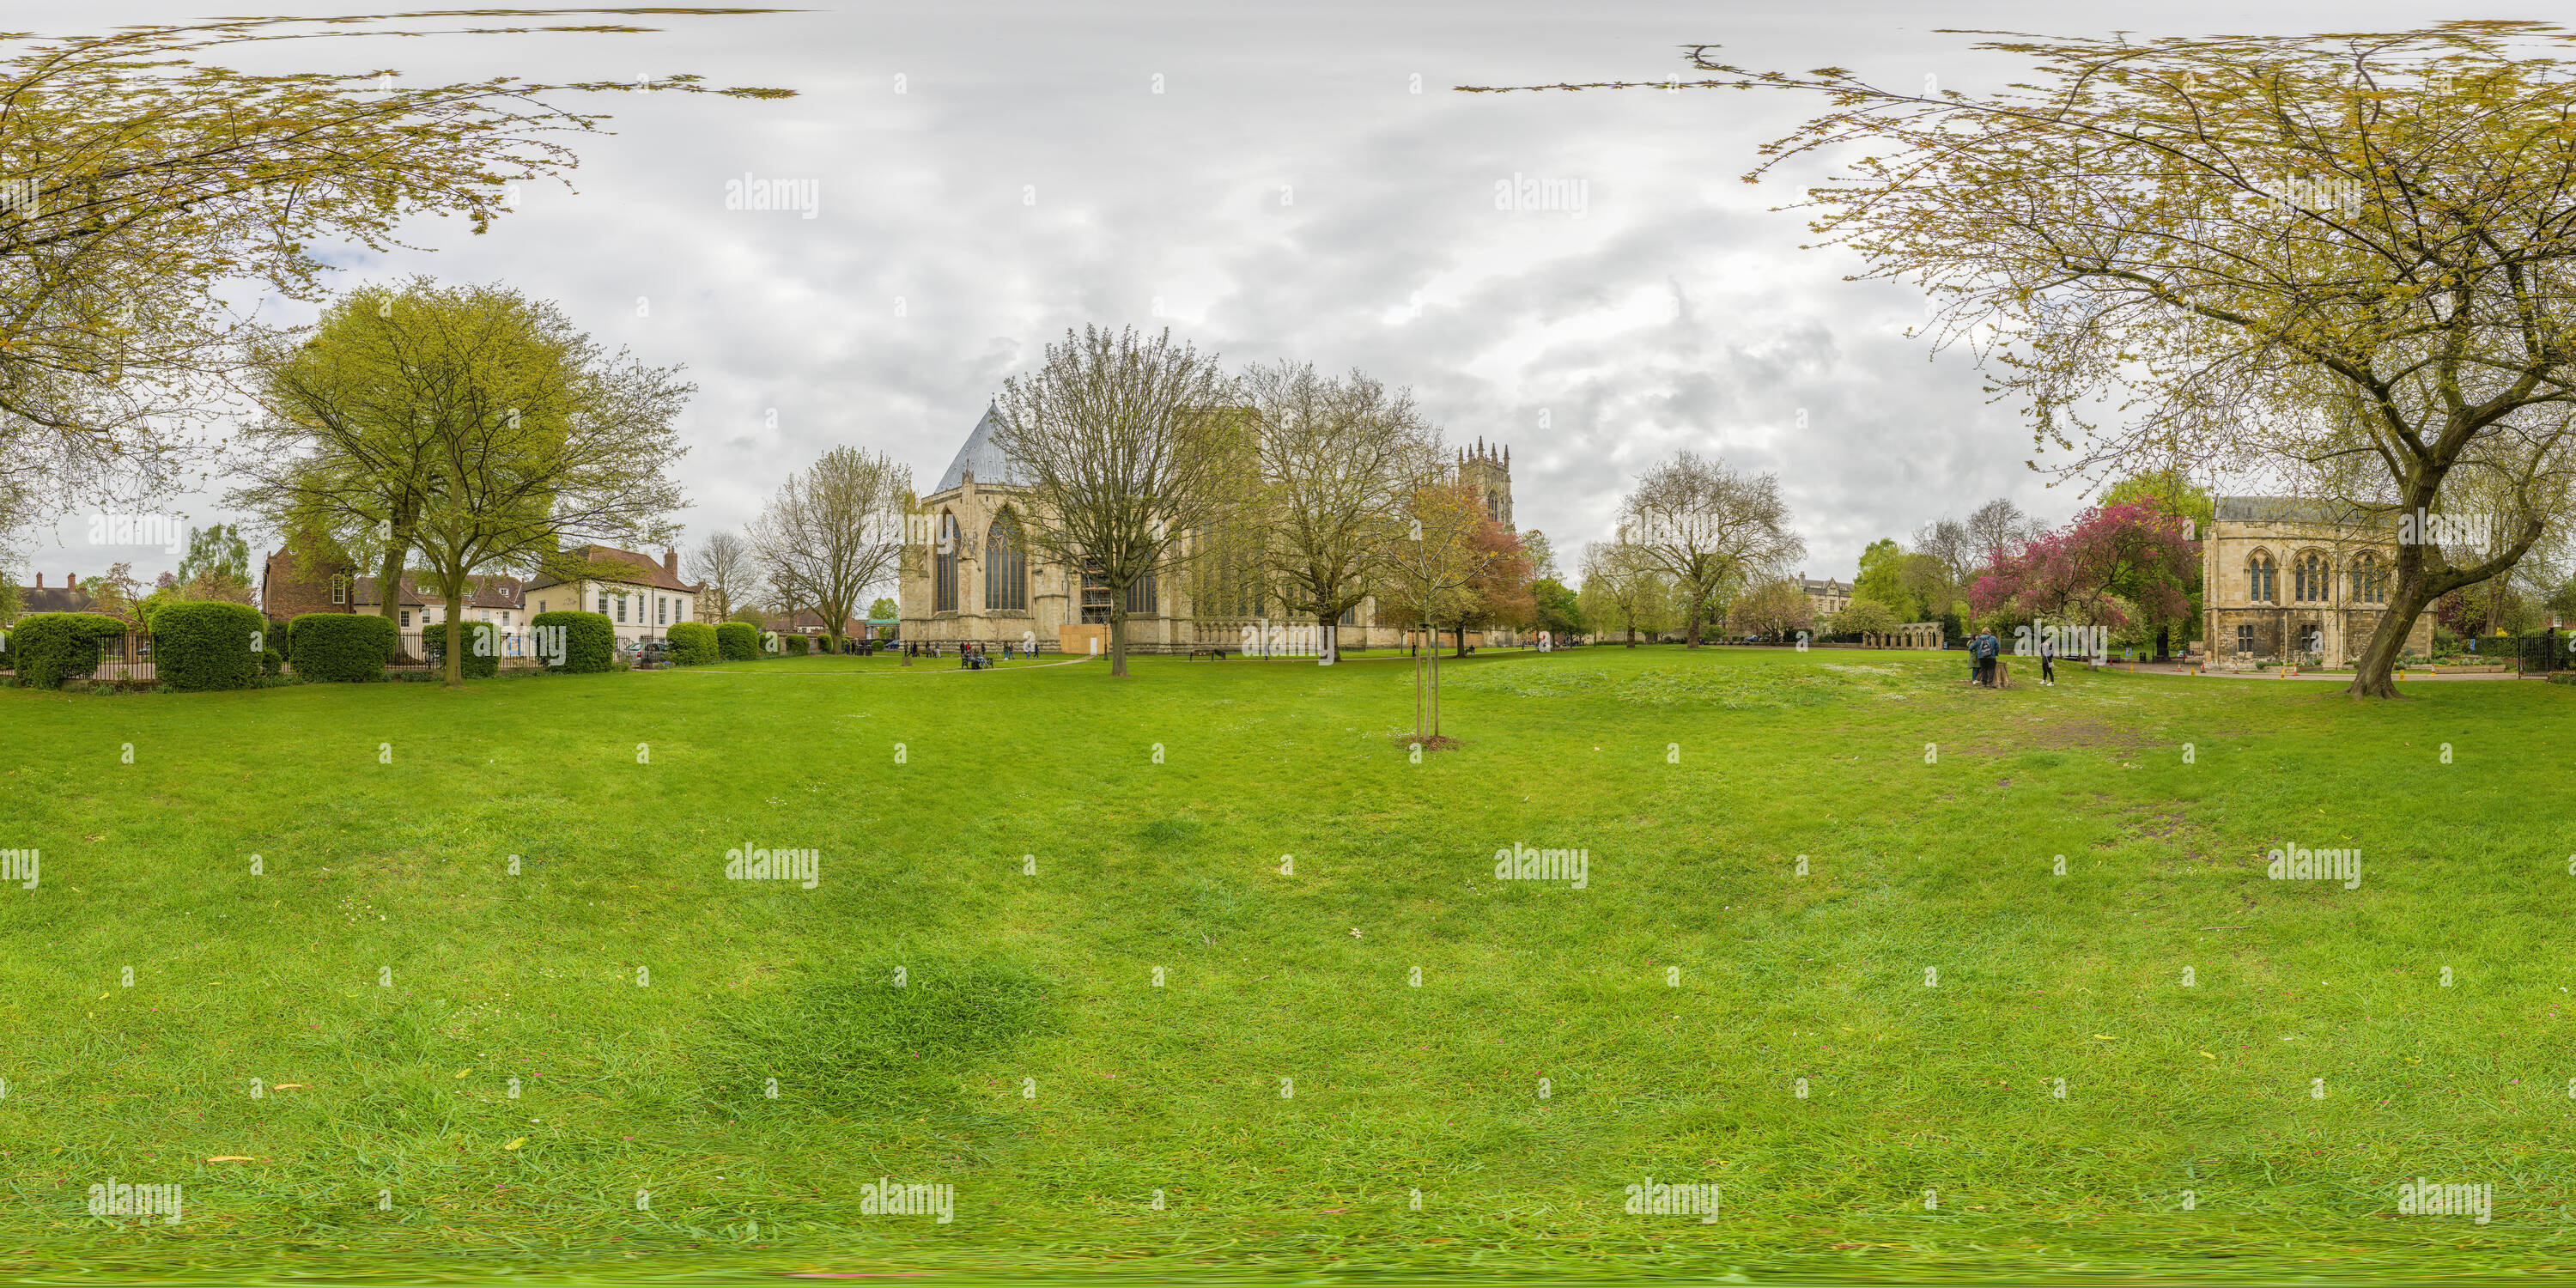 360 degree panoramic view of Dean's park and the north exterior (with chapter house) and old palace, of the medieval cathedral (minster) at York, England, on an overcast spring da